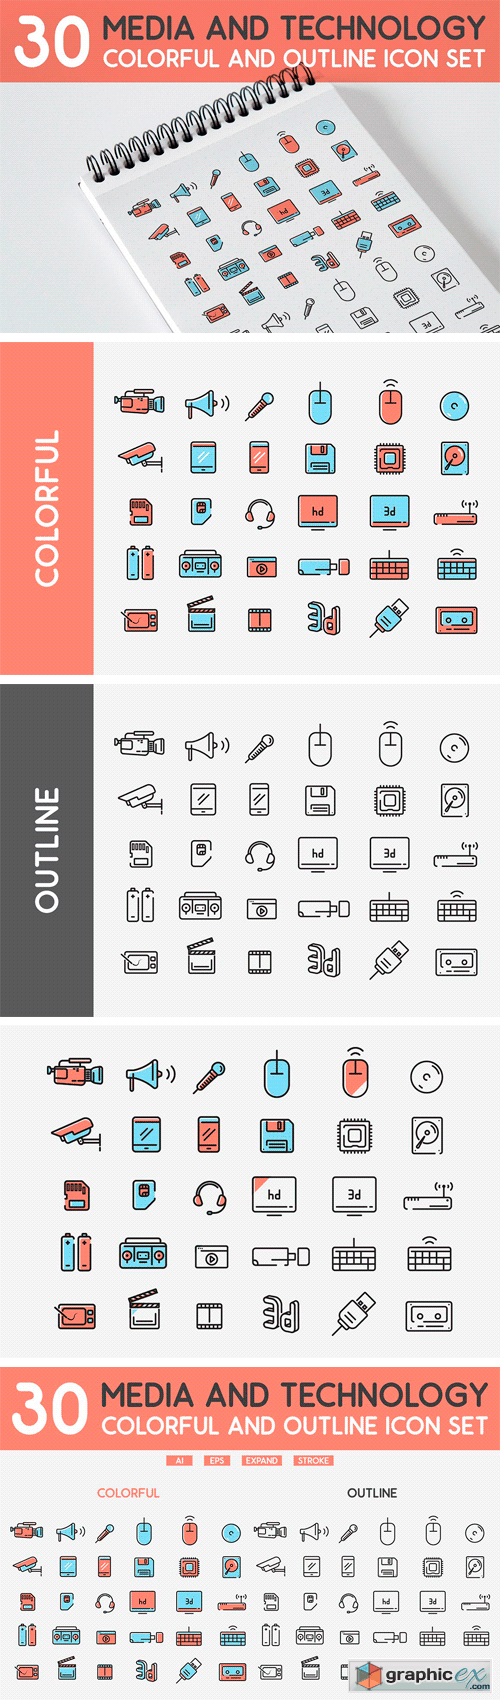 30 Media and Technology Icon Set